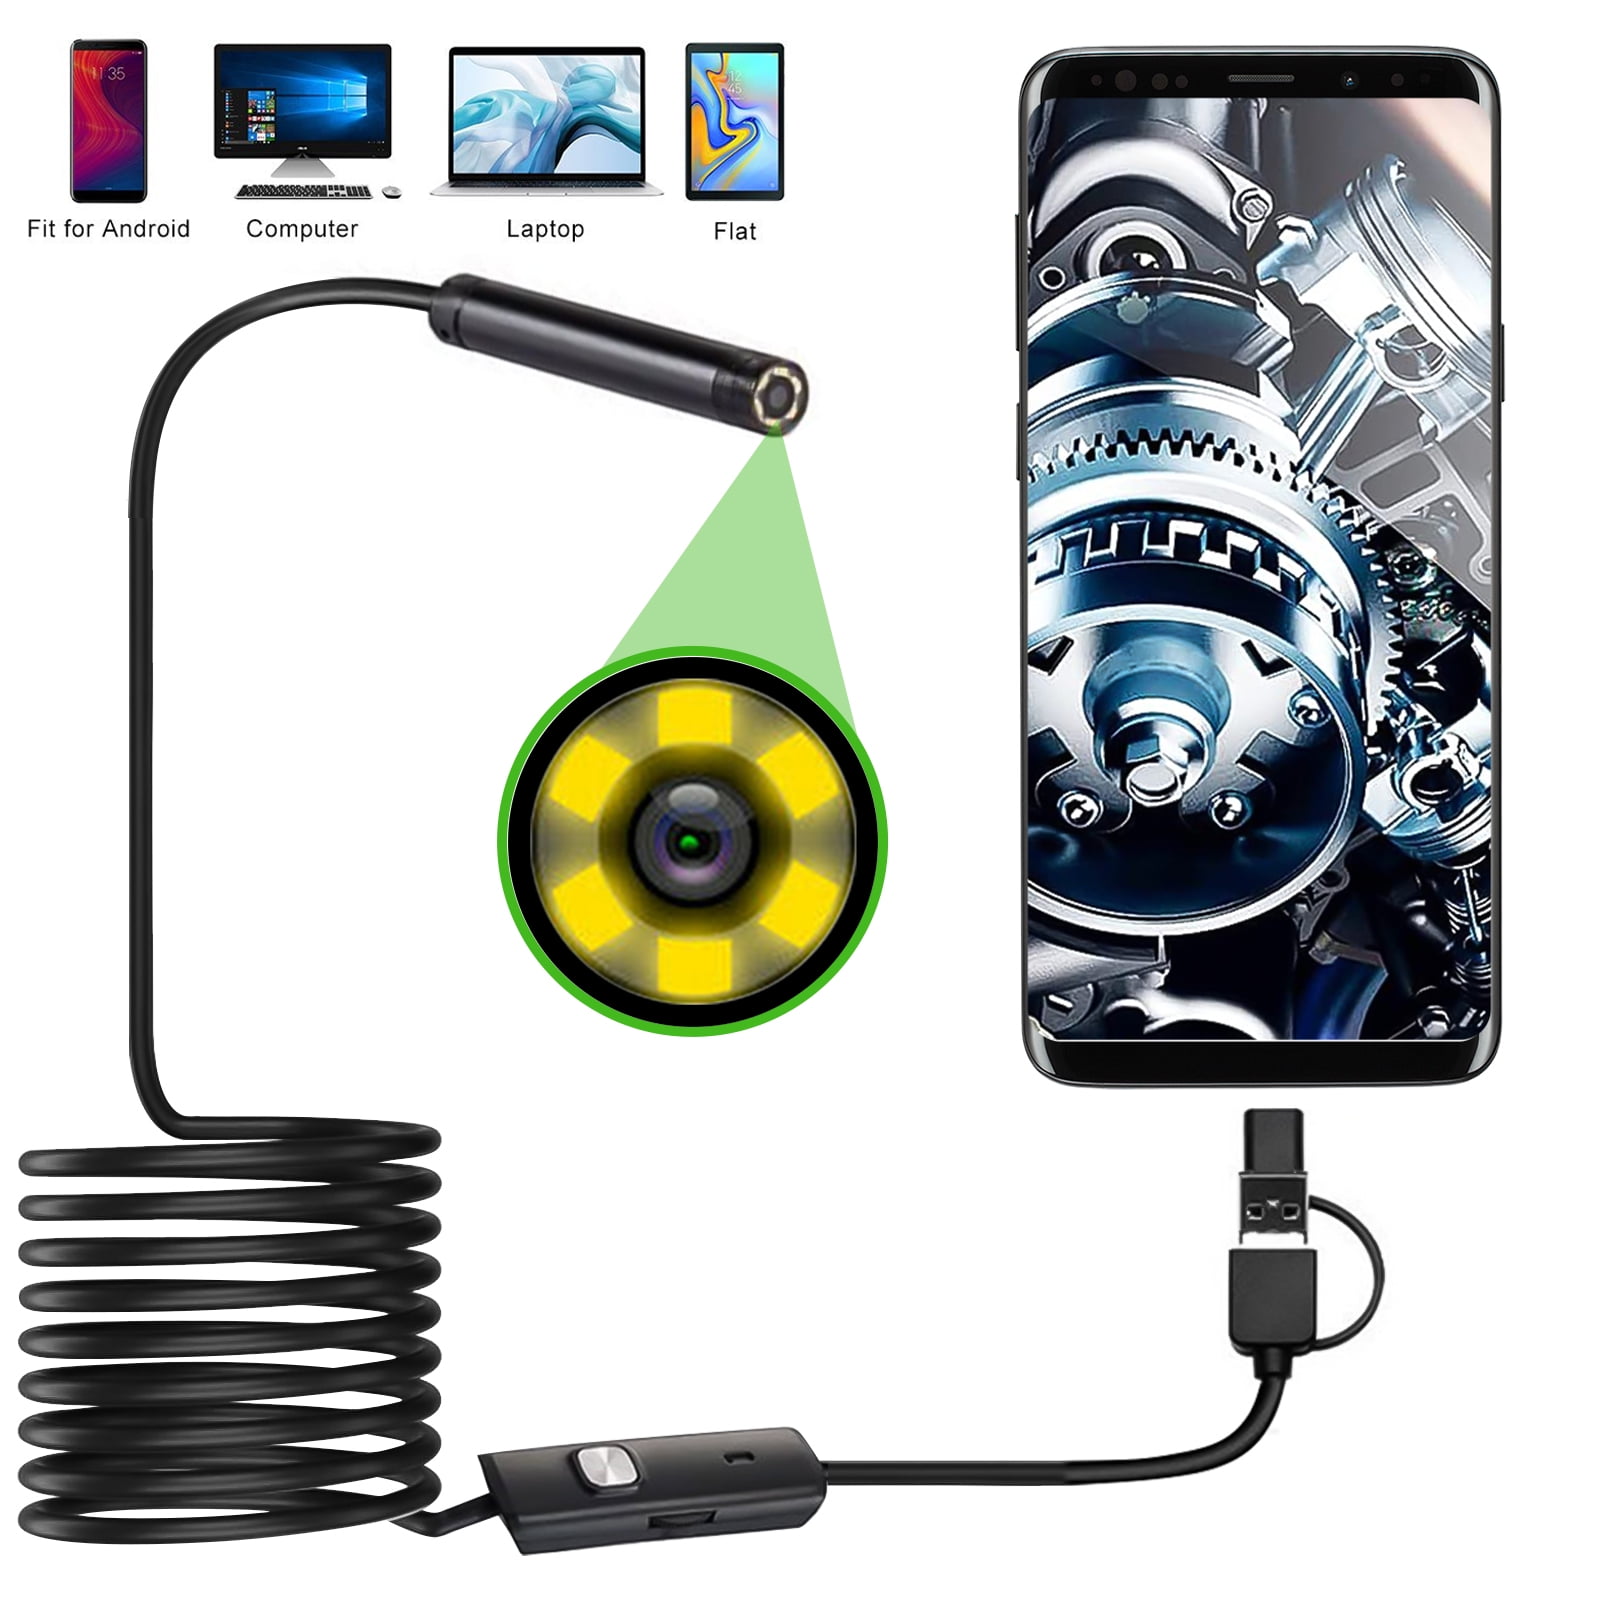 Black CLY USB Endoscope Waterproof Borescope Type-C Snake Inspection Camera 2.0 MP with 8 Adjustable LED Lights for Android Phone Tablet Device PC Laptop 